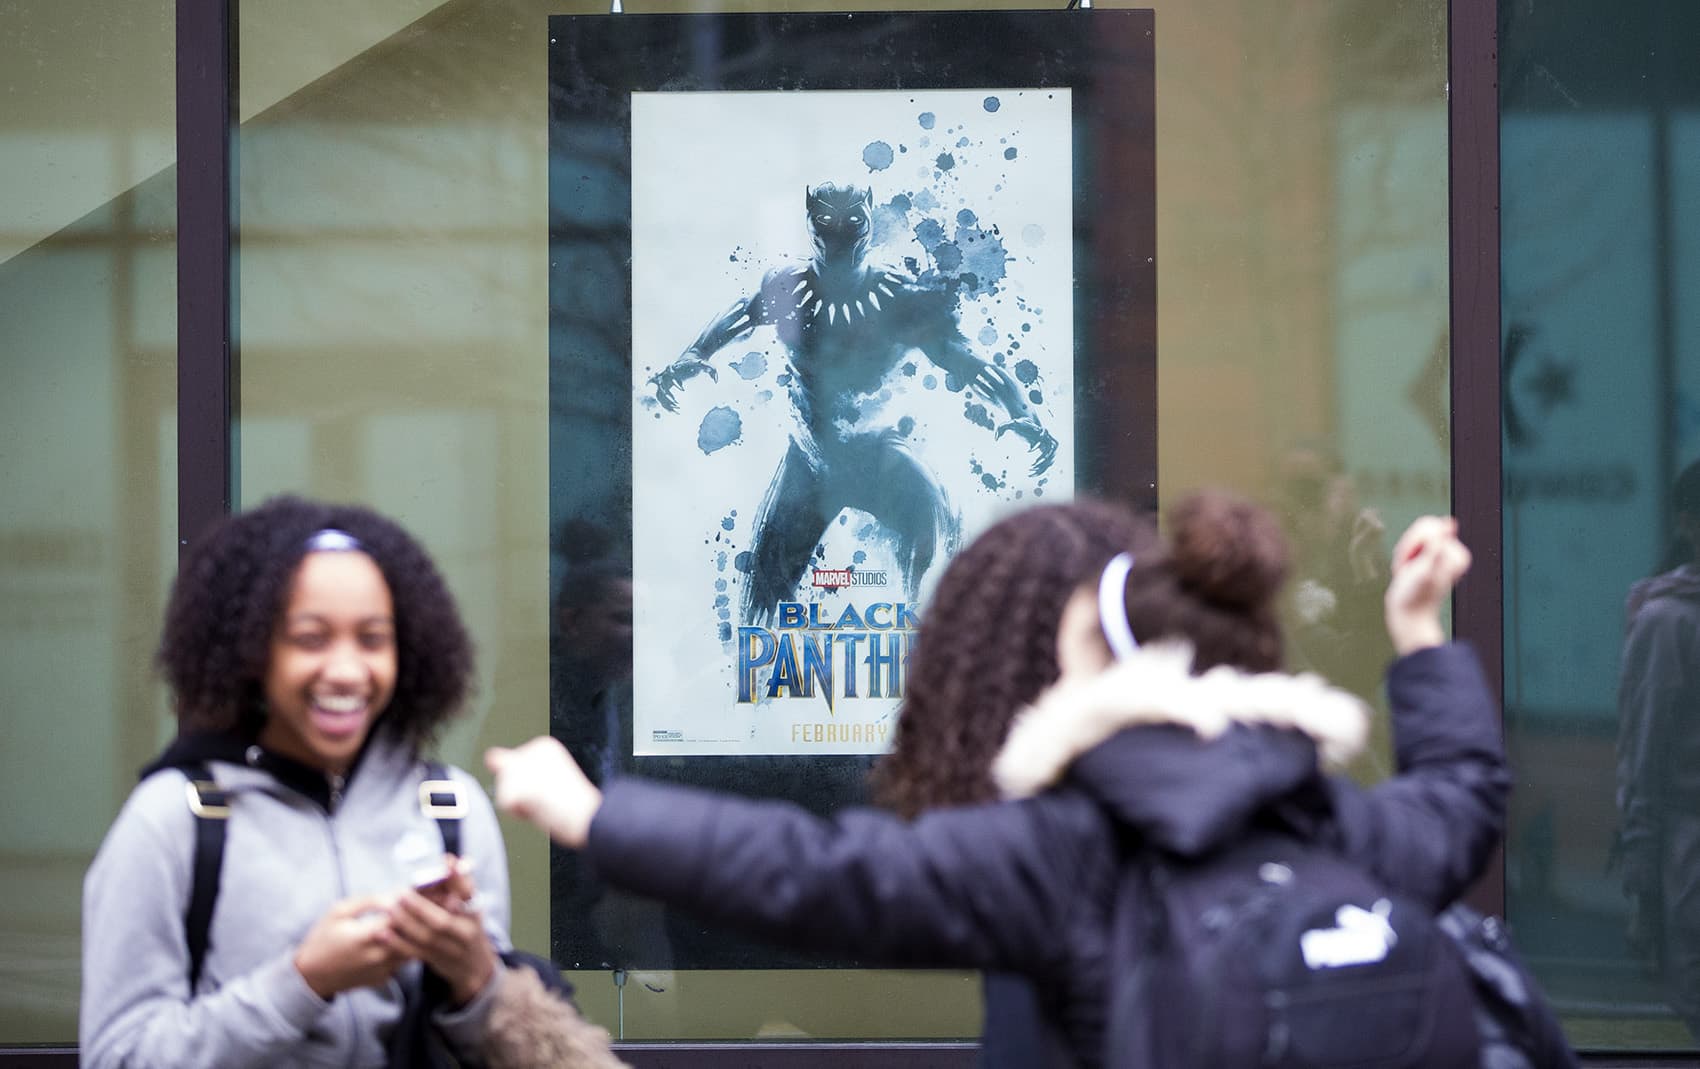 Students from the New Mission High School in Hyde Park line up to attend a private screening of "Black Panther" at the South Bay AMC Theater. (Jesse Costa/WBUR)